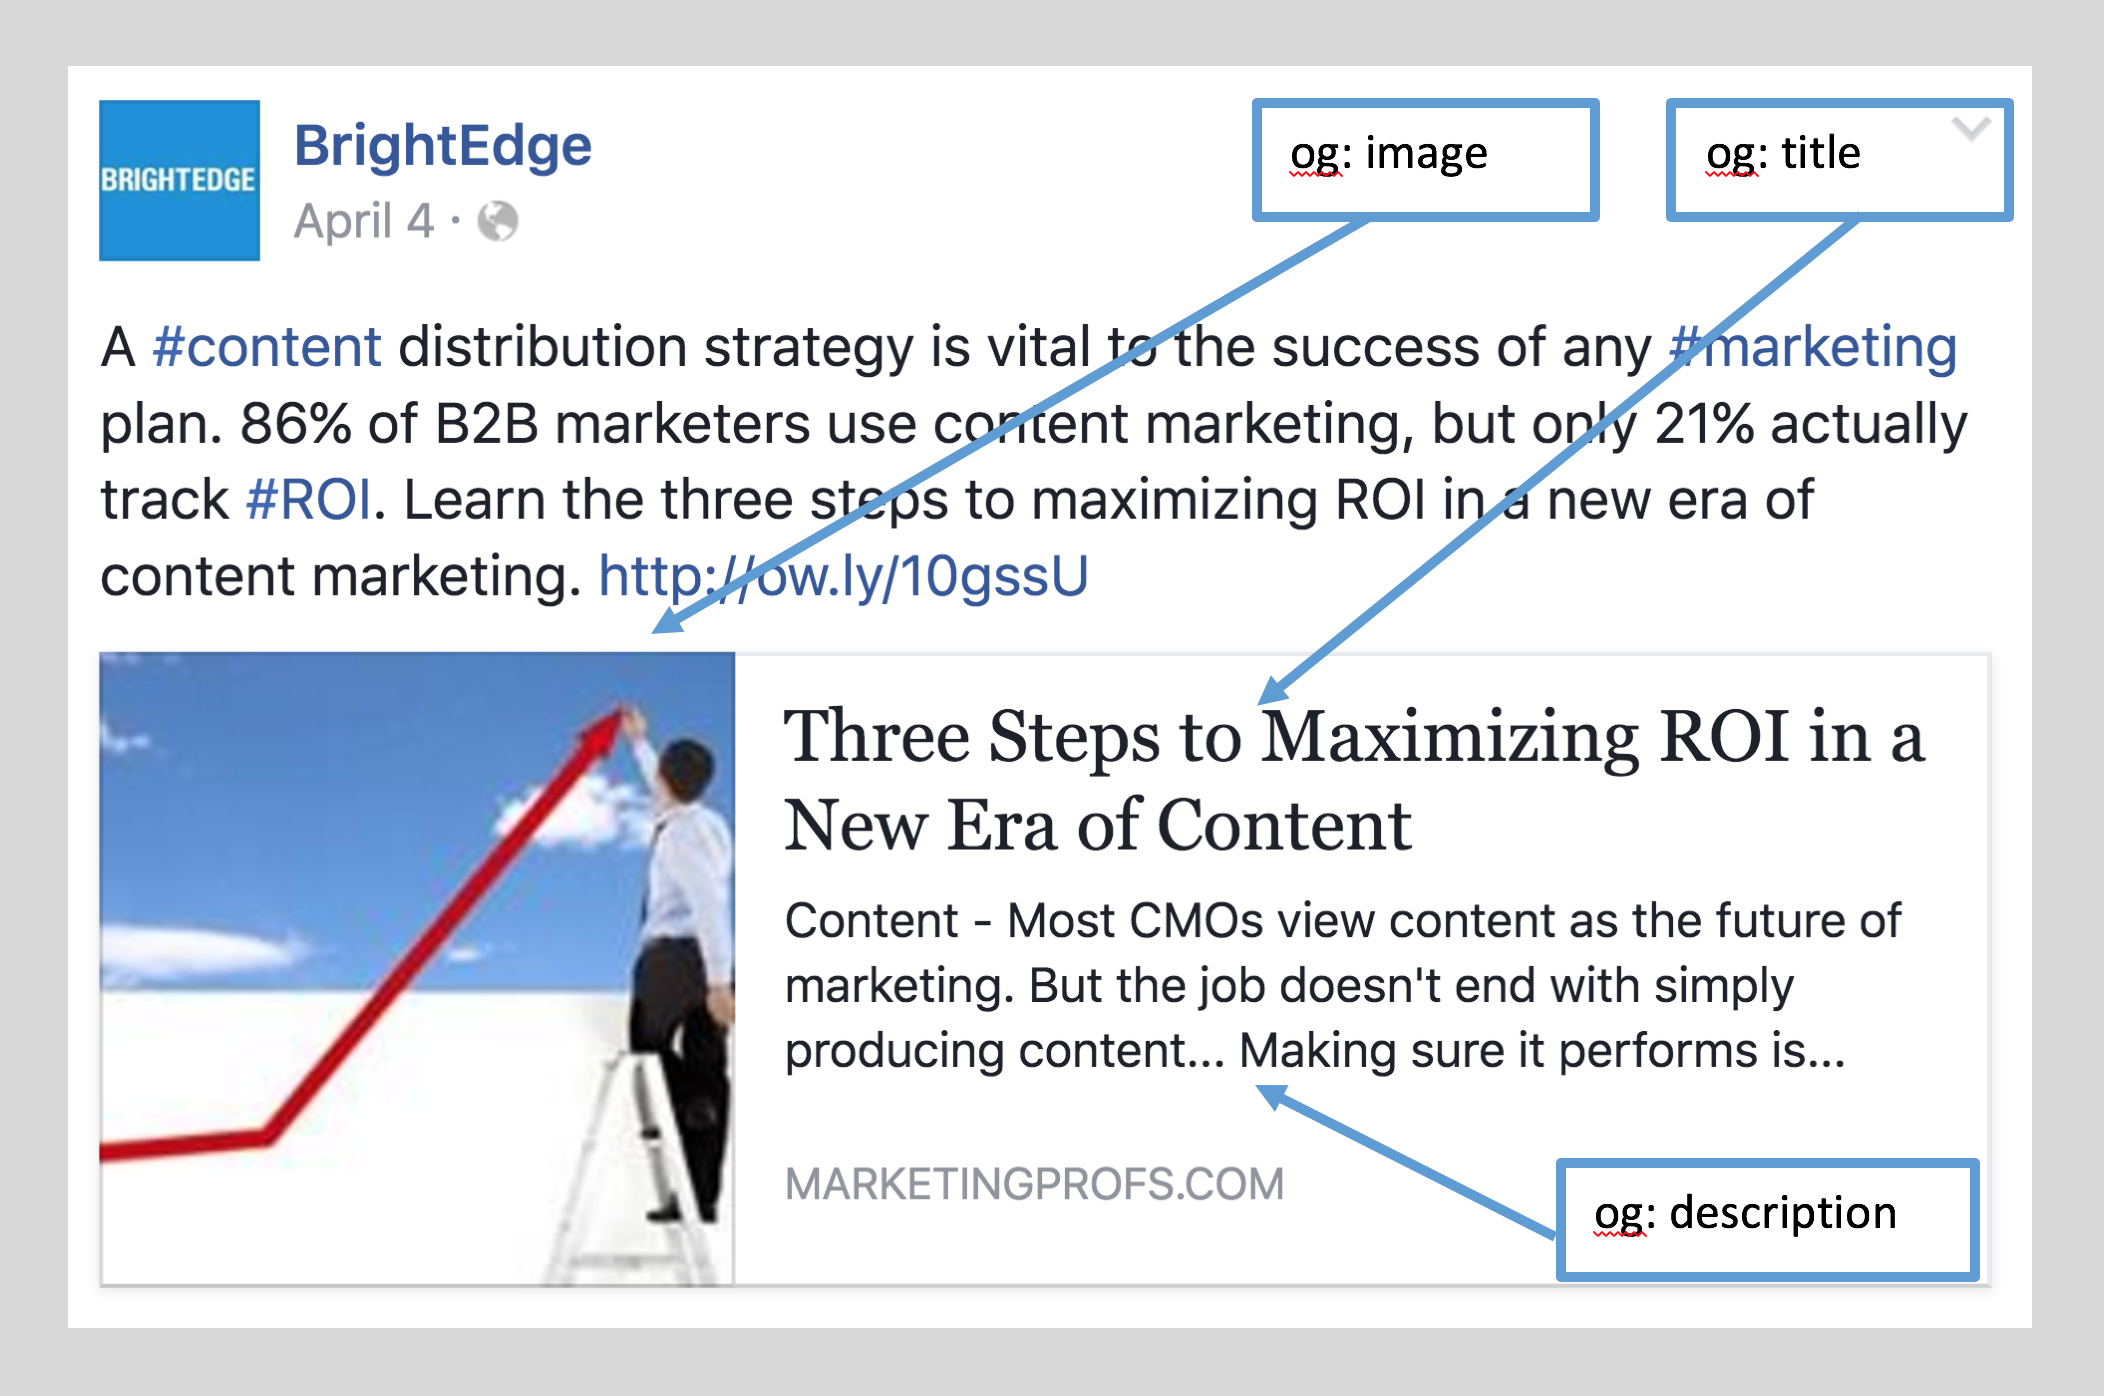 Example of Open Graph for Facebook Marketing - brightedge